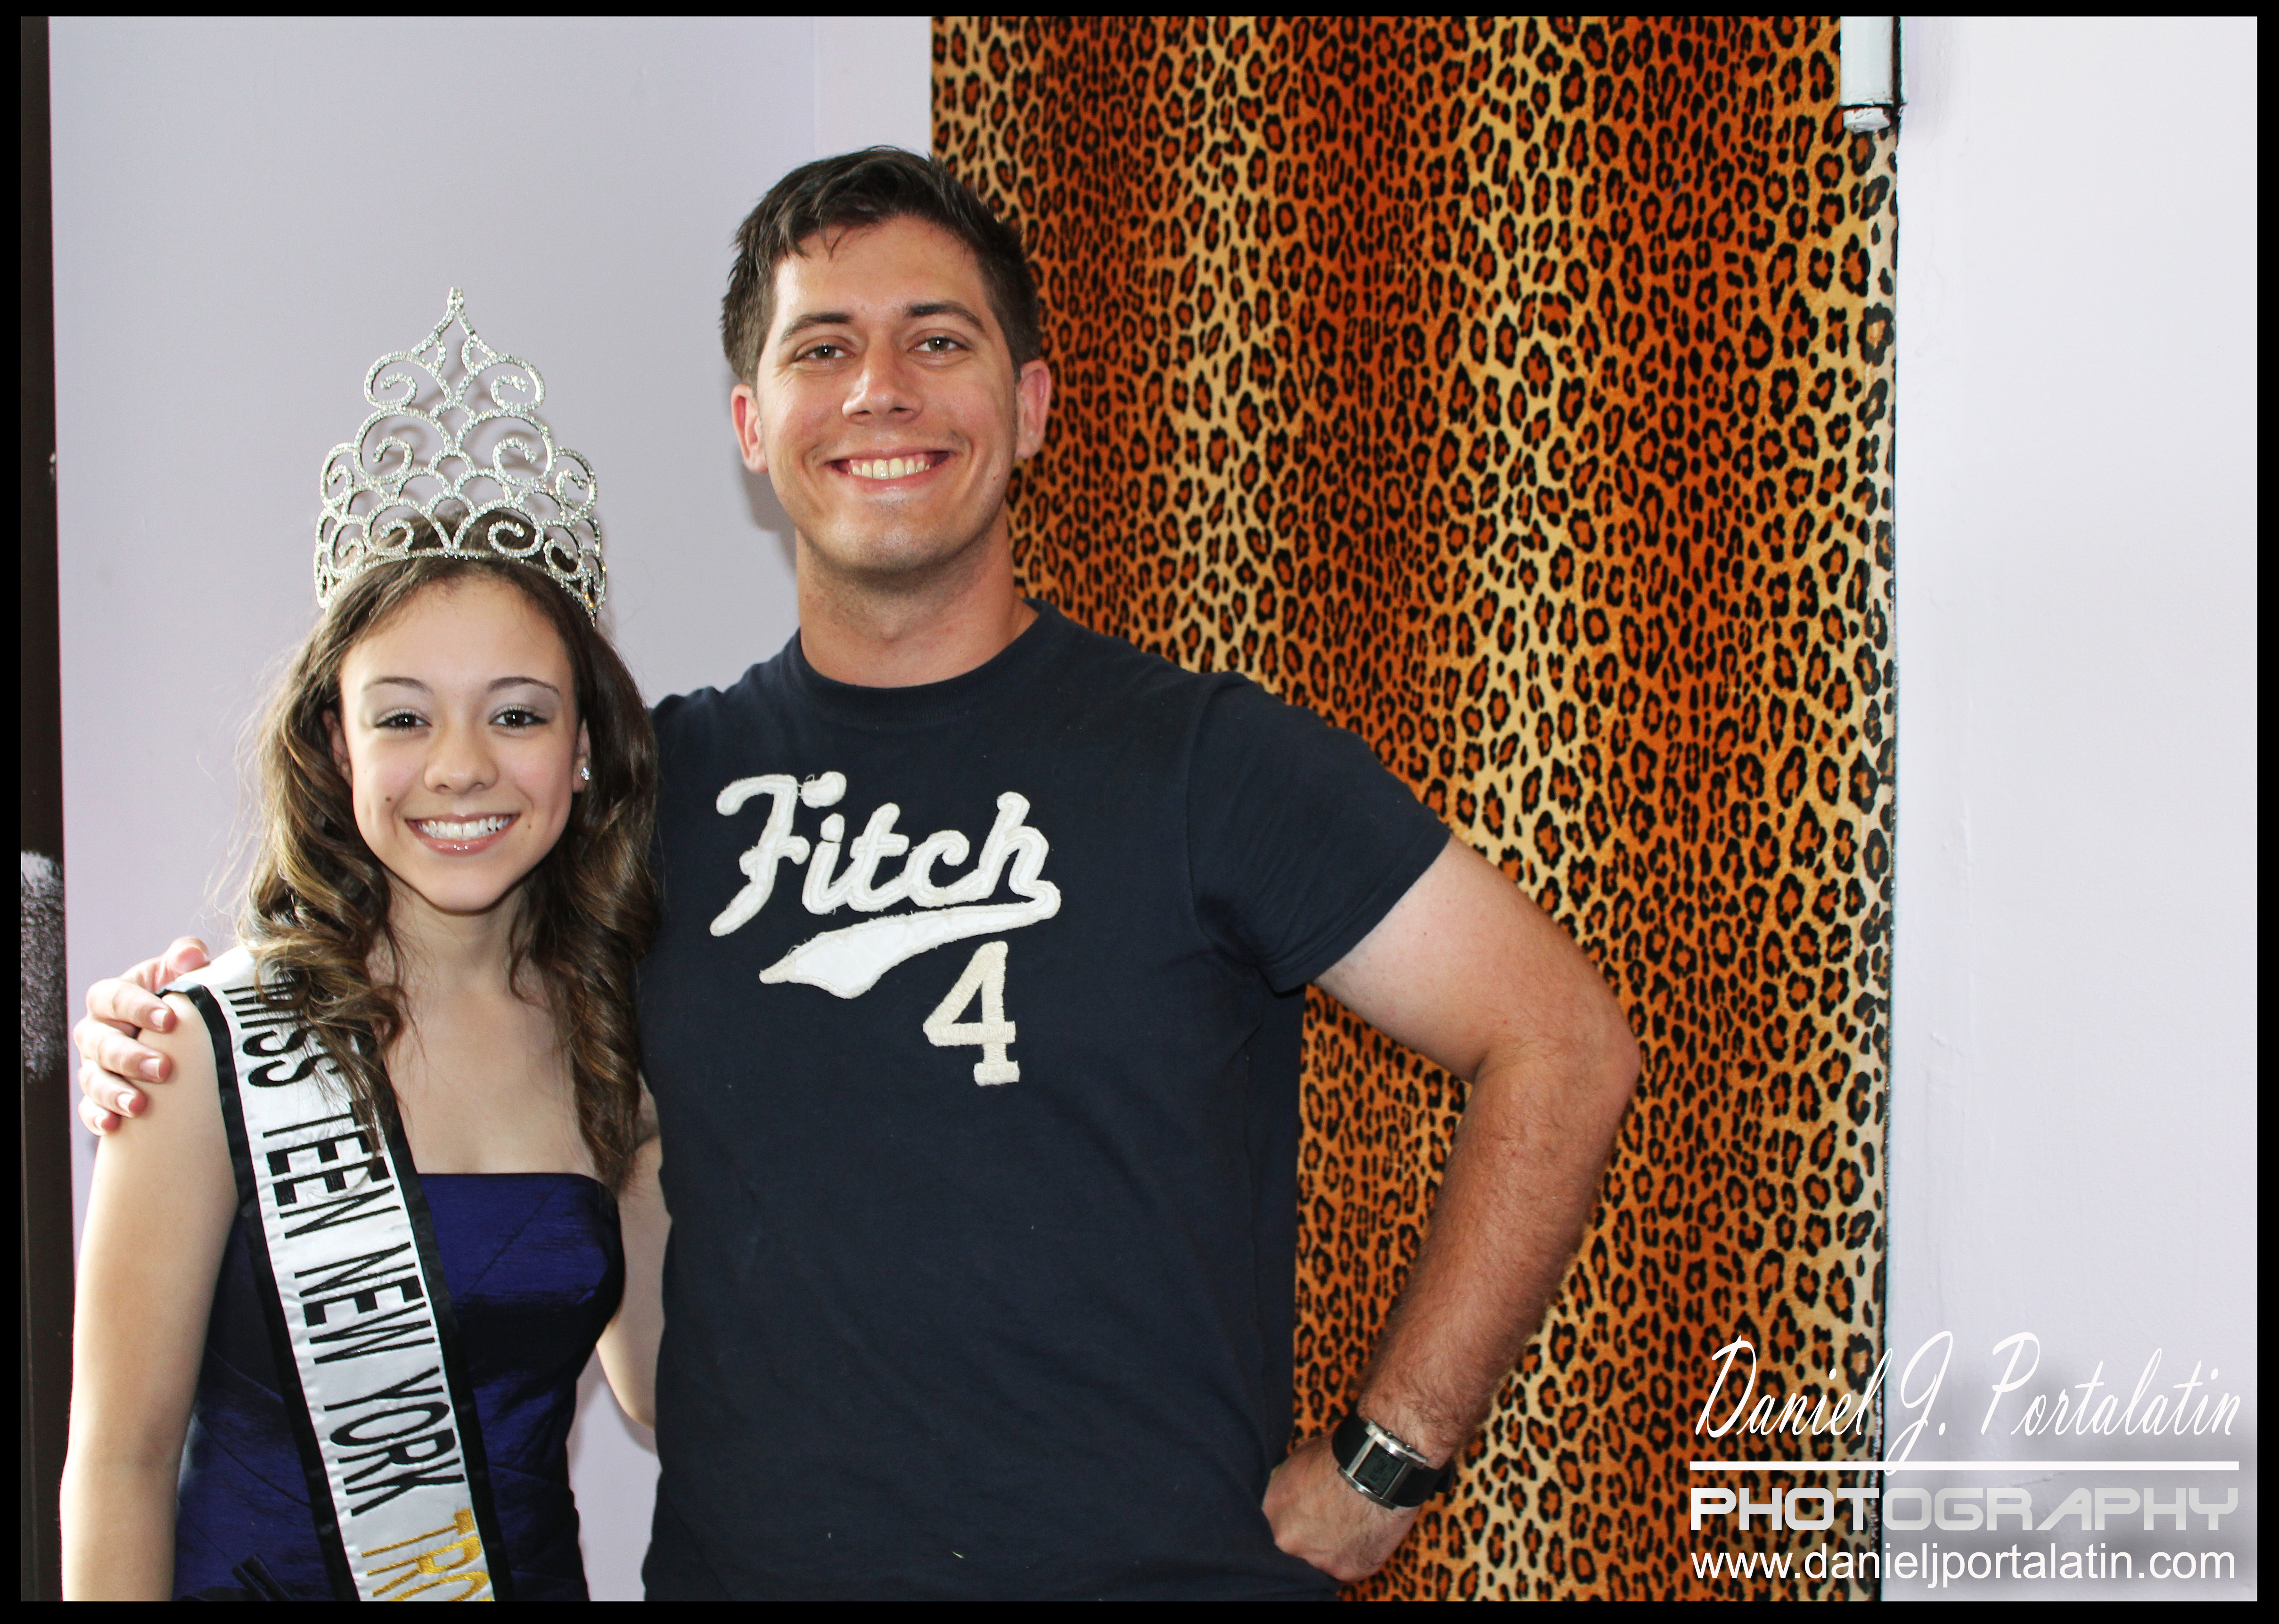 Gary Lester with Miss Teen New York City